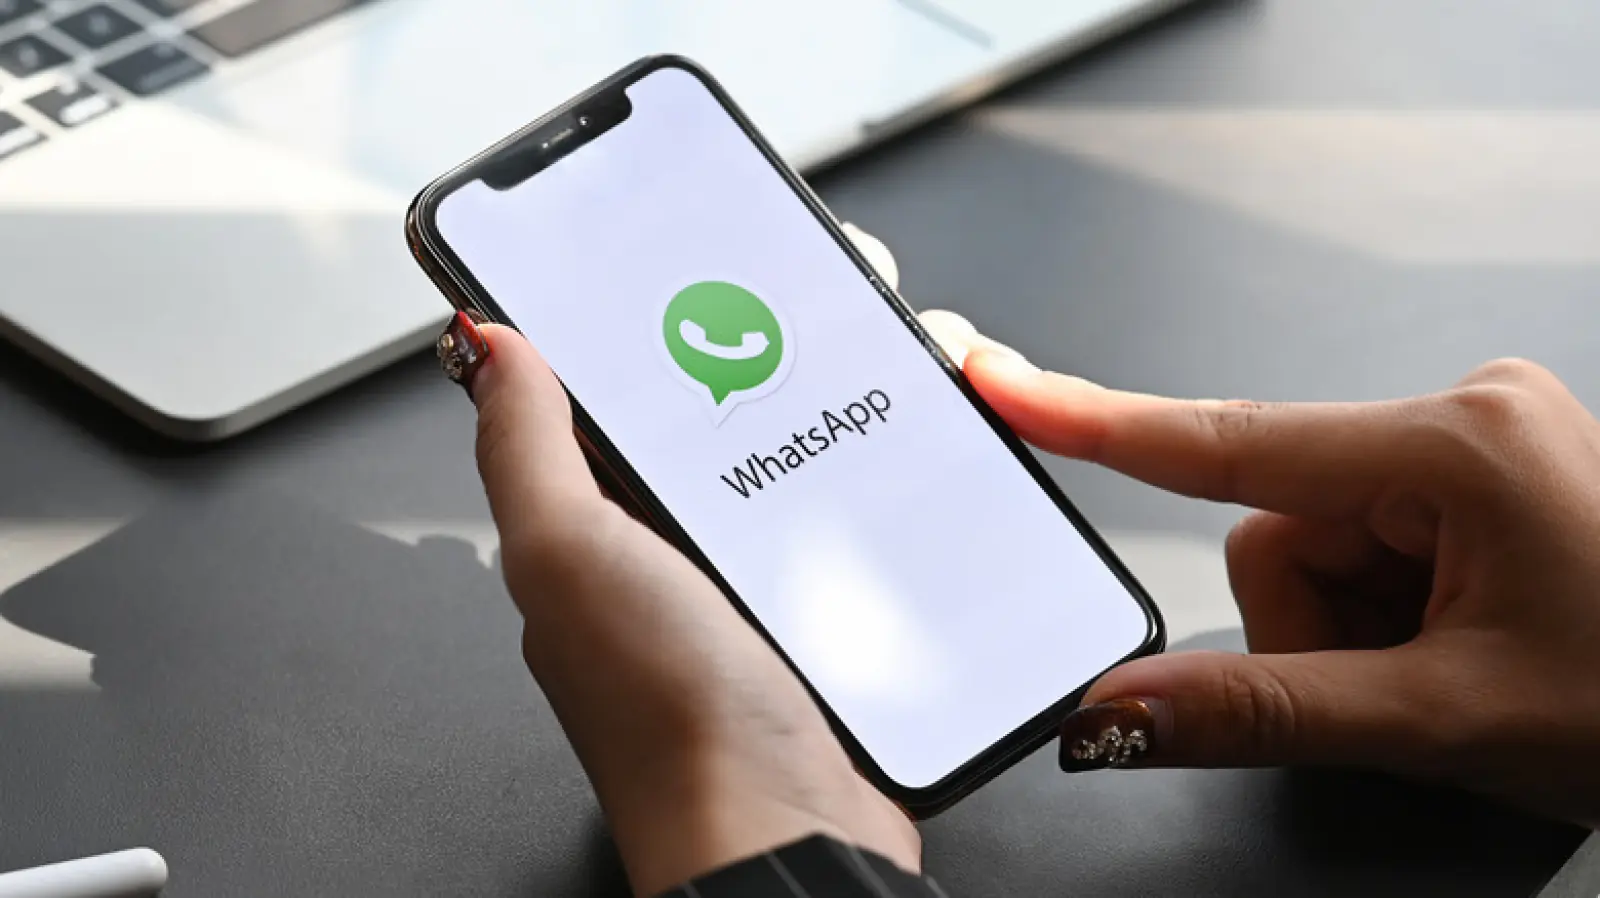 Now messages from companies will not bother you on WhatsApp business account, deal like this